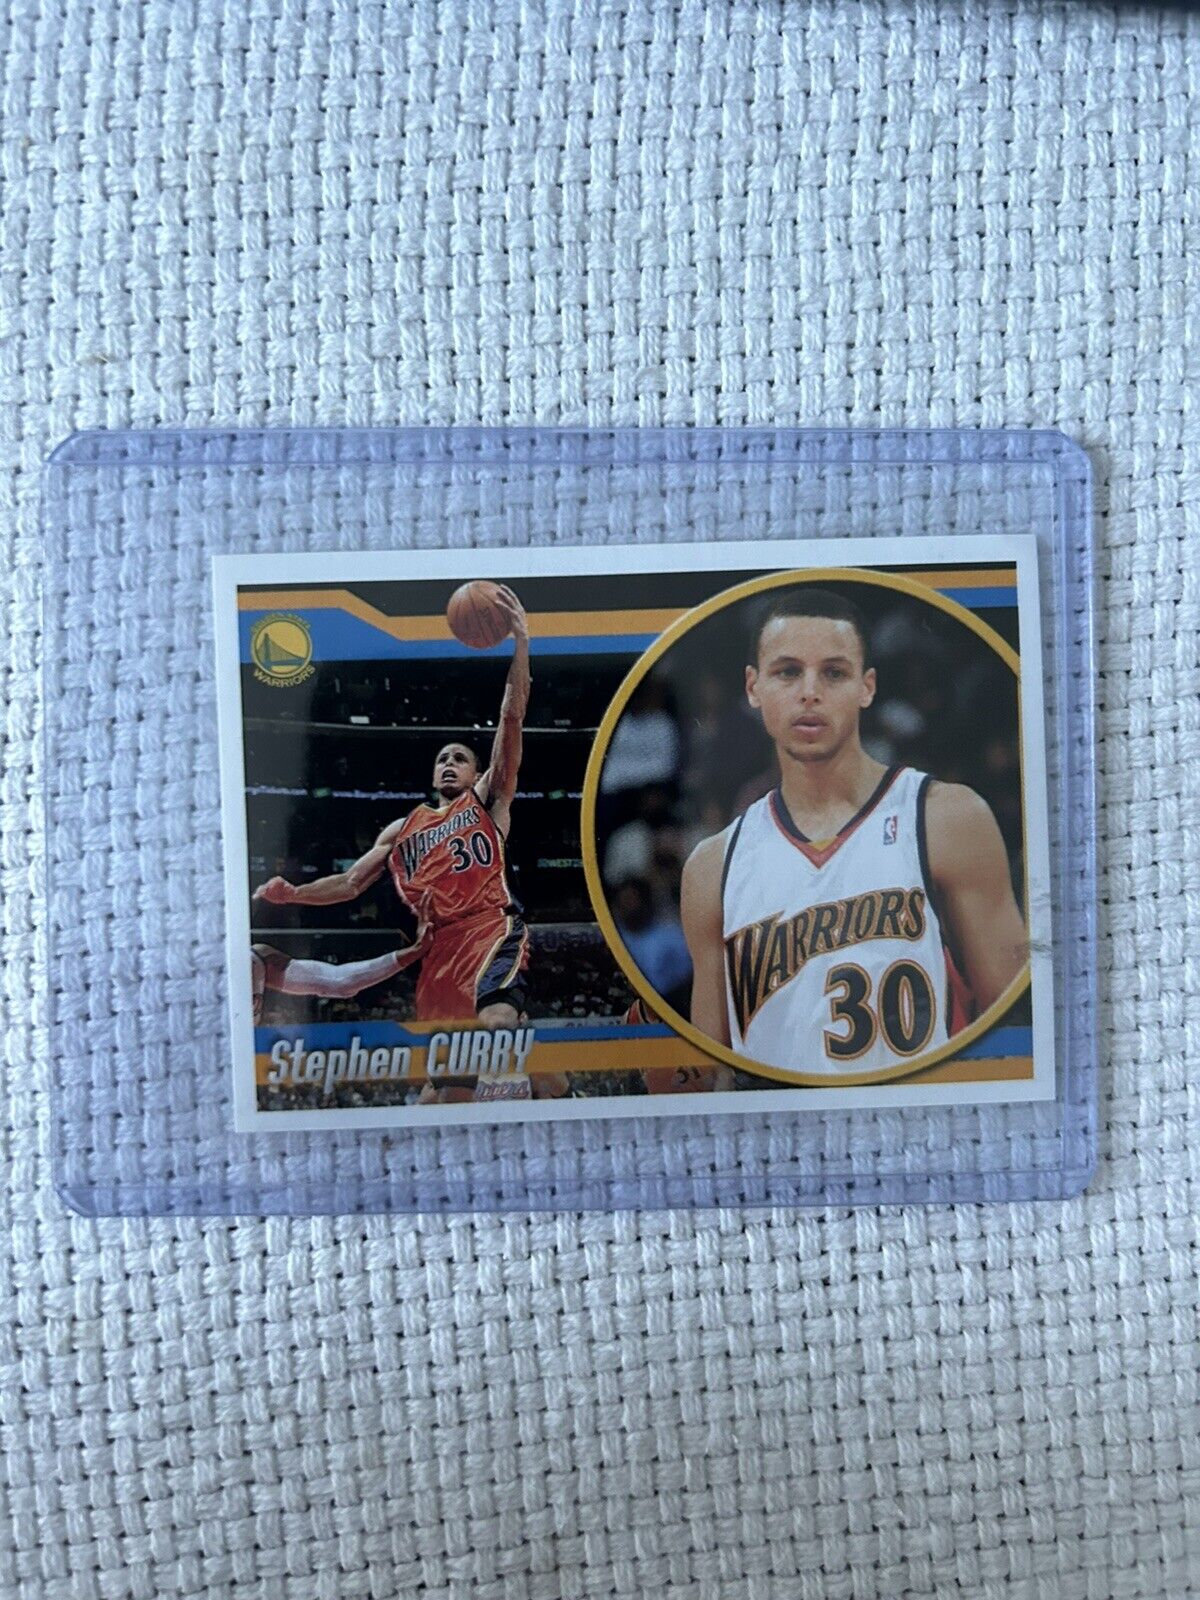 2010-11 Panini Album Stickers Stephen Curry #272 Golden State Warriors 2nd Year